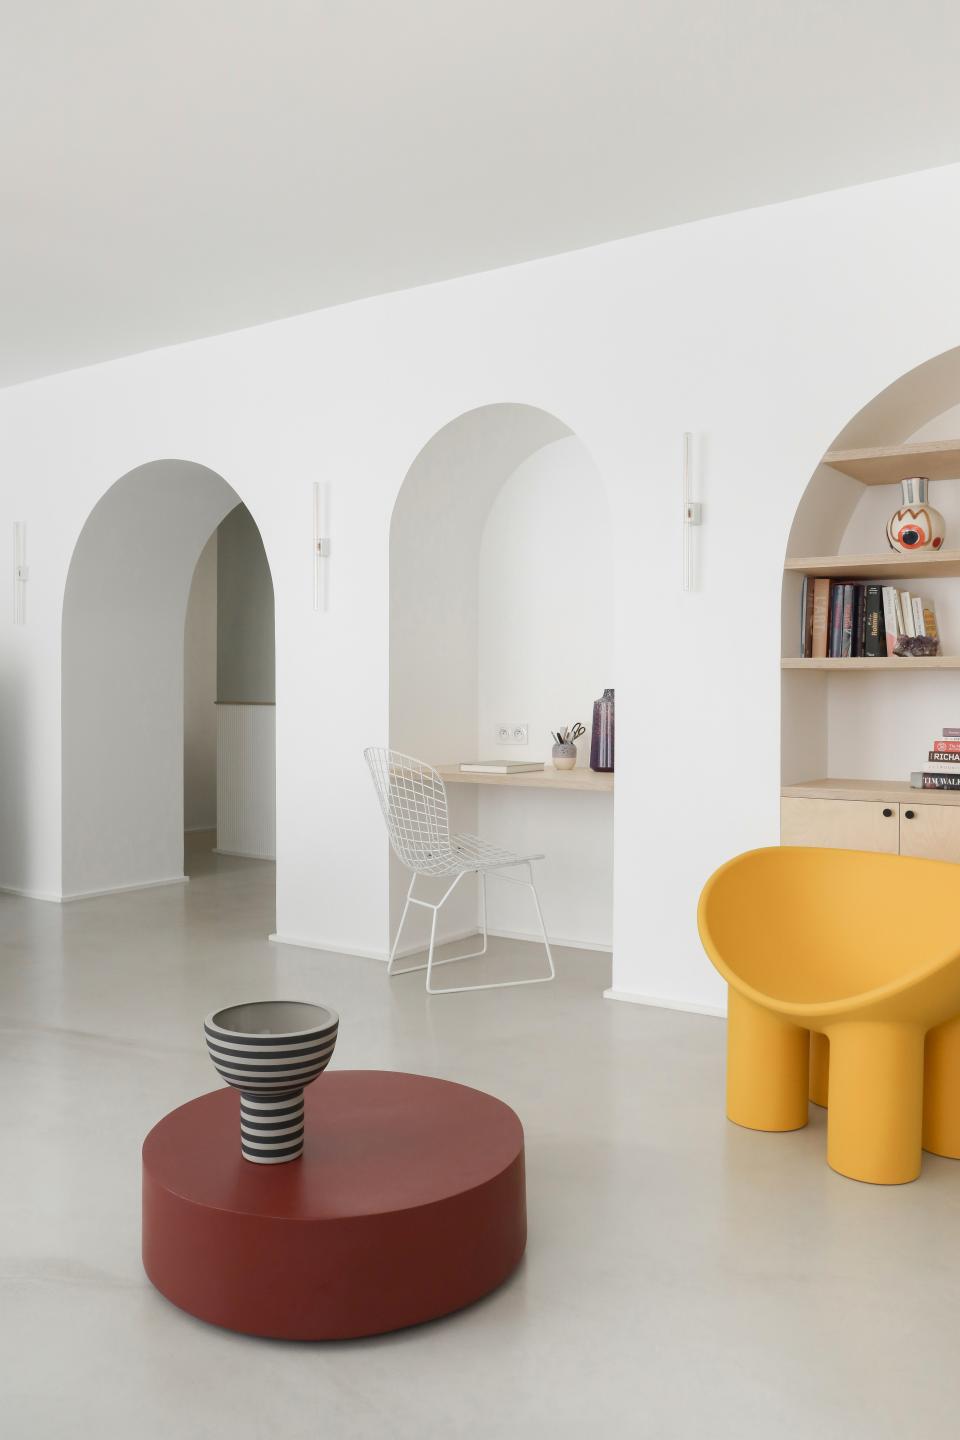 AFTER: One of the biggest changes to the home was this arched “living wall” created by the architects. The yellow Roly Poly chair by Faye Toogood adds a pop of color to the living room furnished with a Serax coffee table and vases by AYTM and LRNCE.